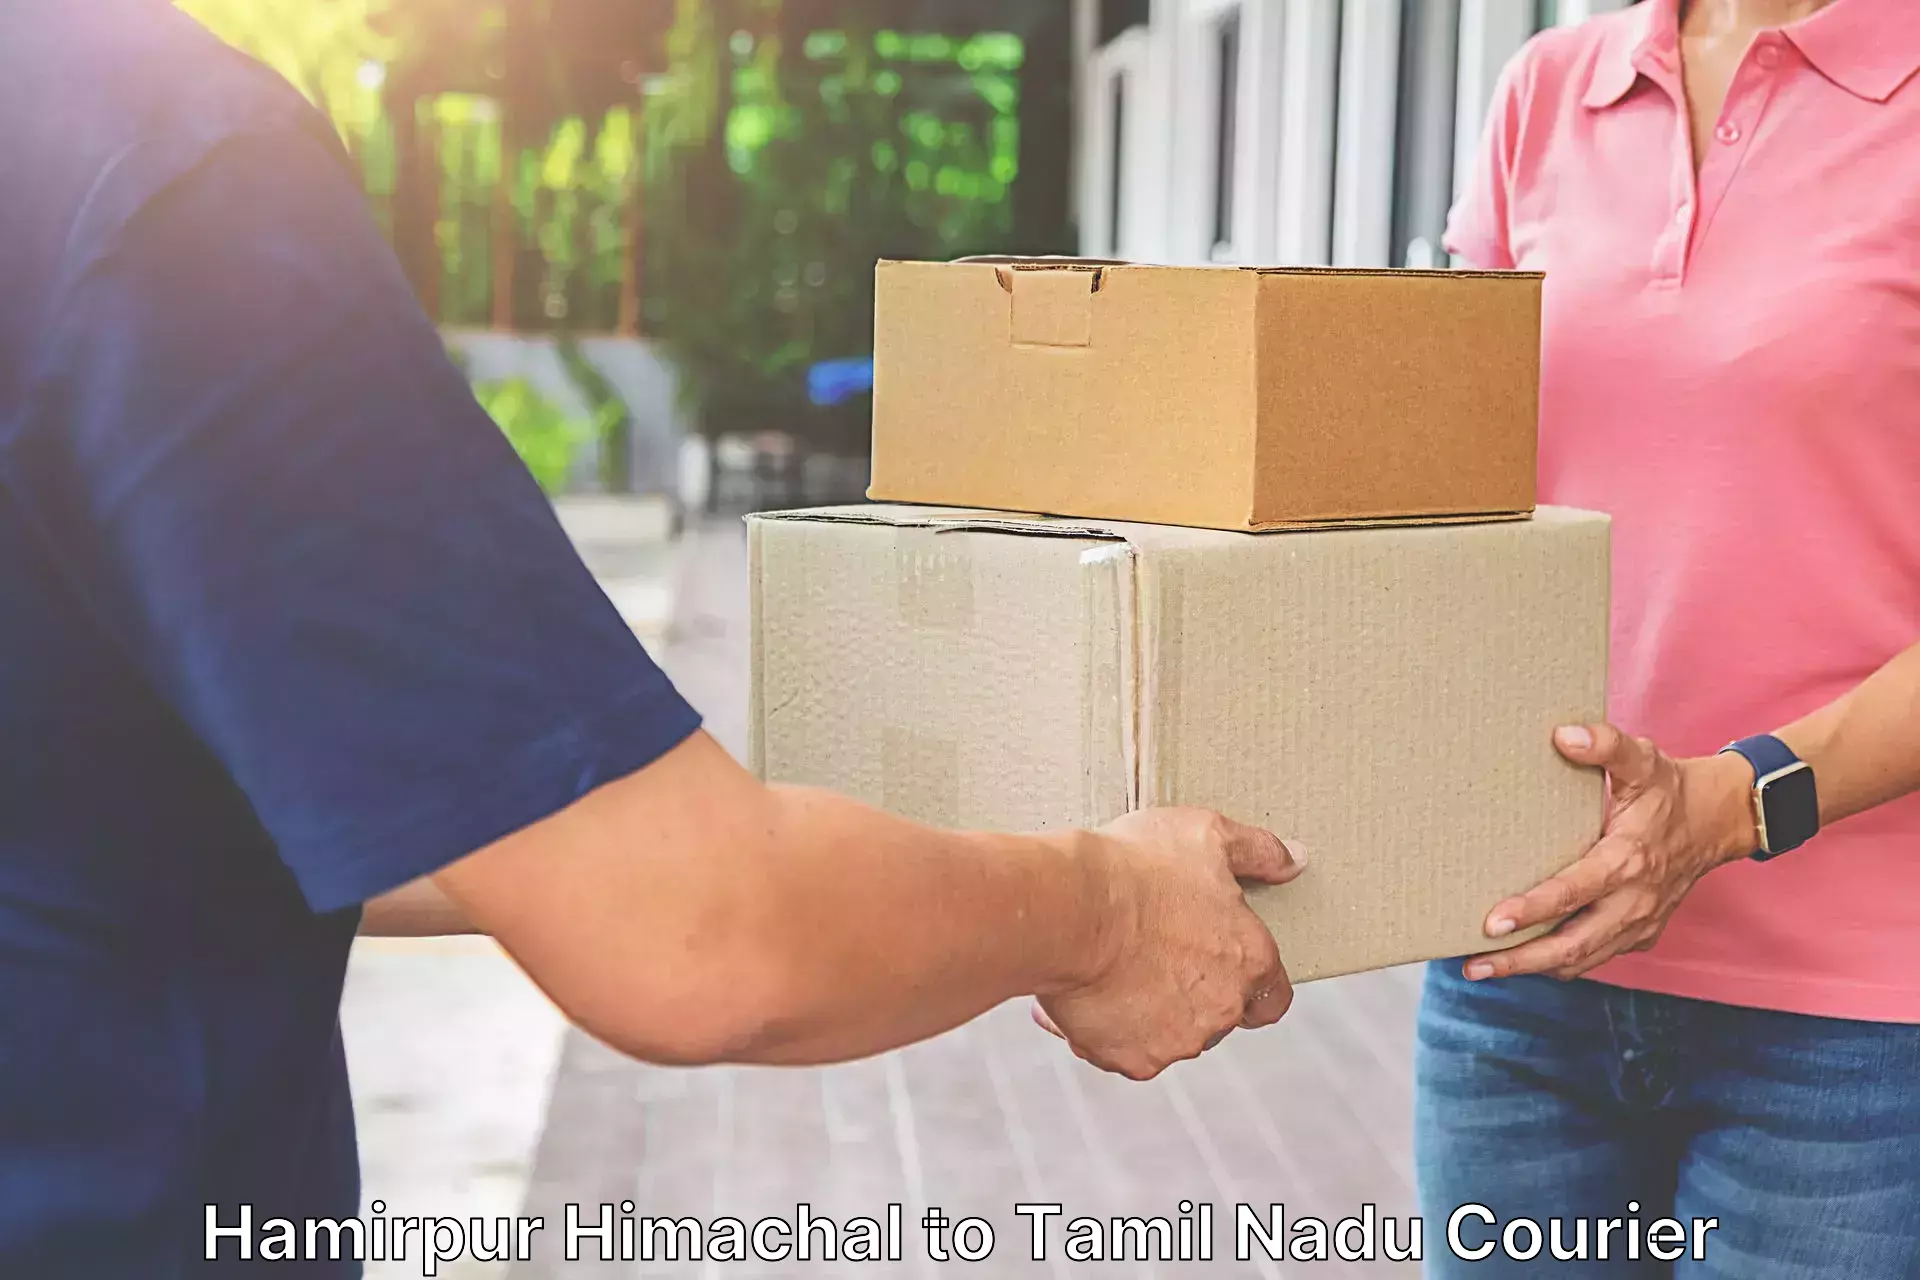 Online courier booking Hamirpur Himachal to Ooty